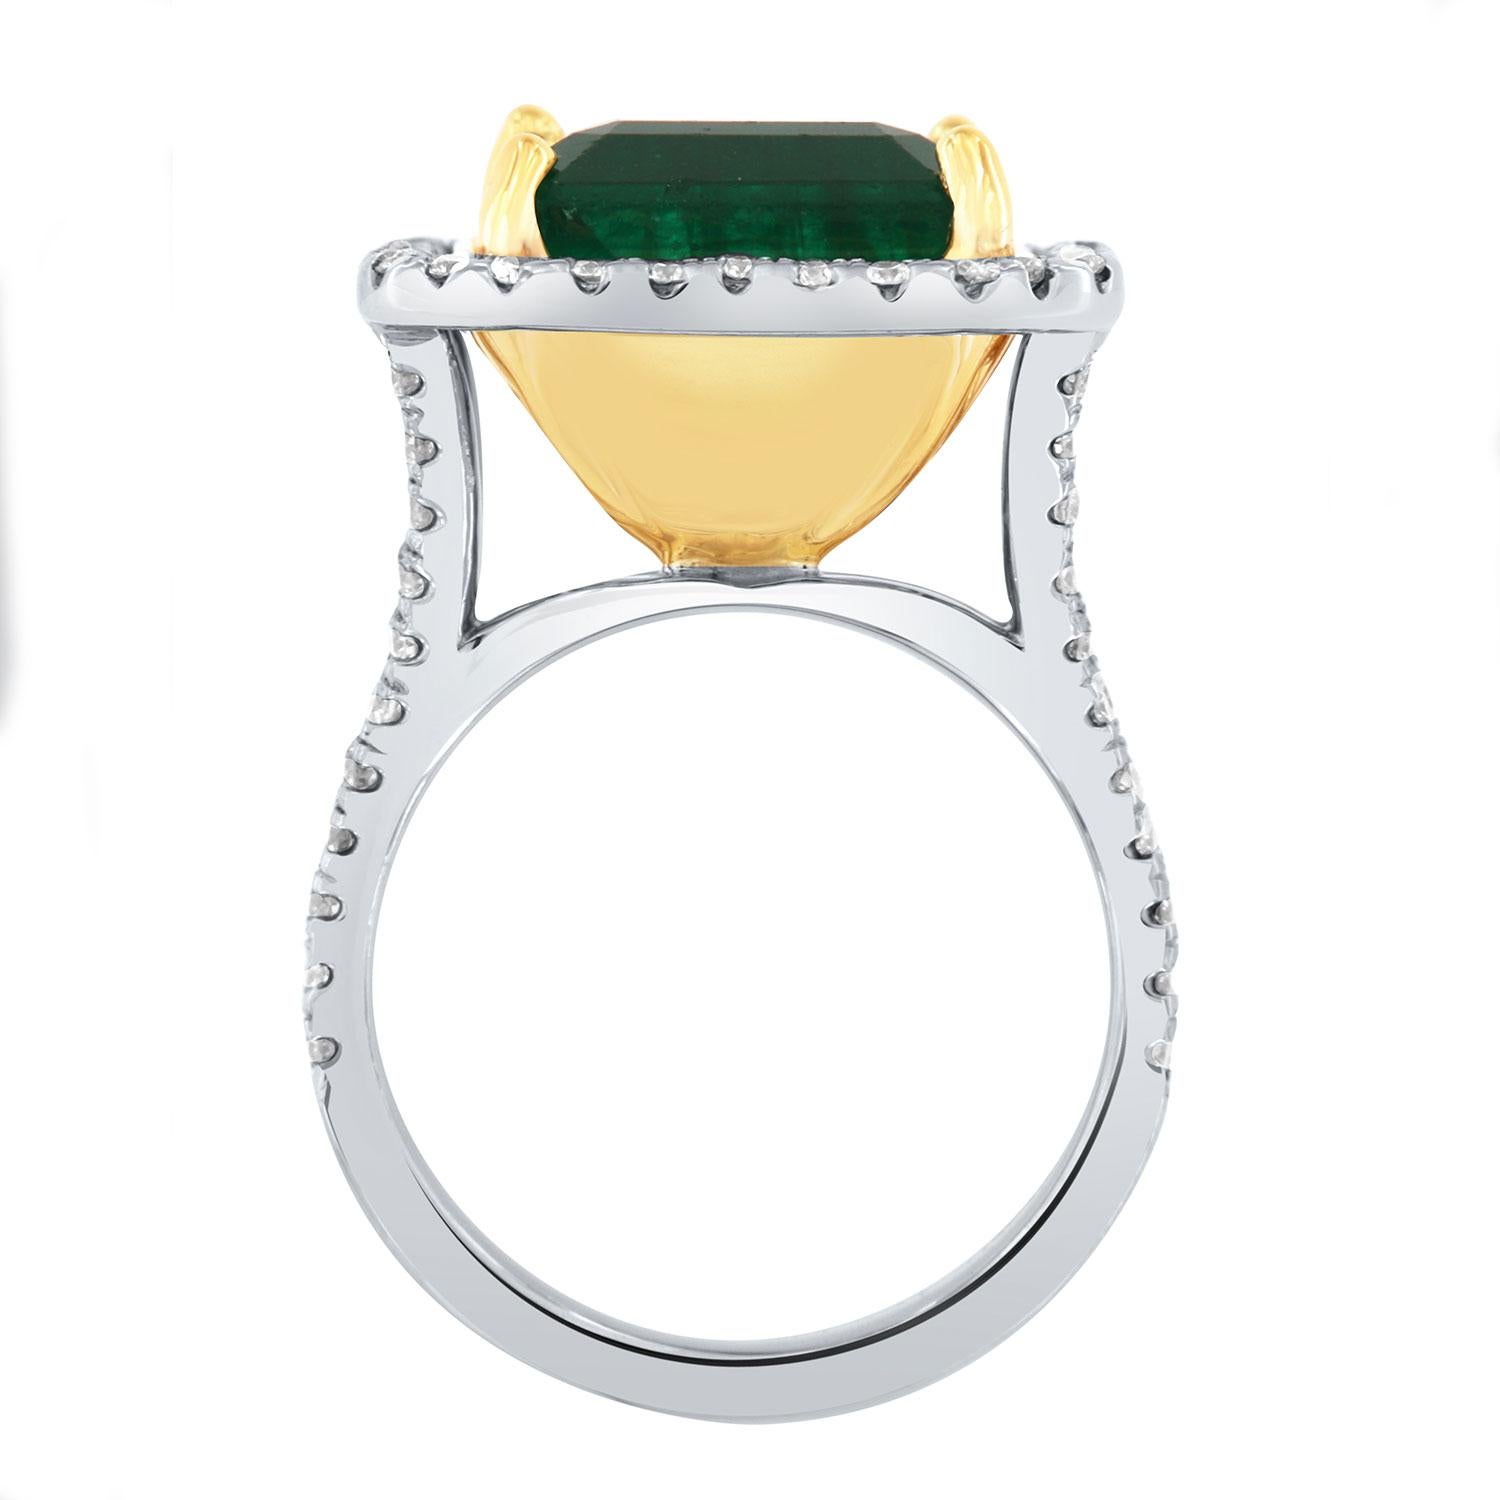 GIA Certified 9.61 Carat Green Emerald 18K White & Yellow Halo Diamond Ring In New Condition For Sale In San Francisco, CA